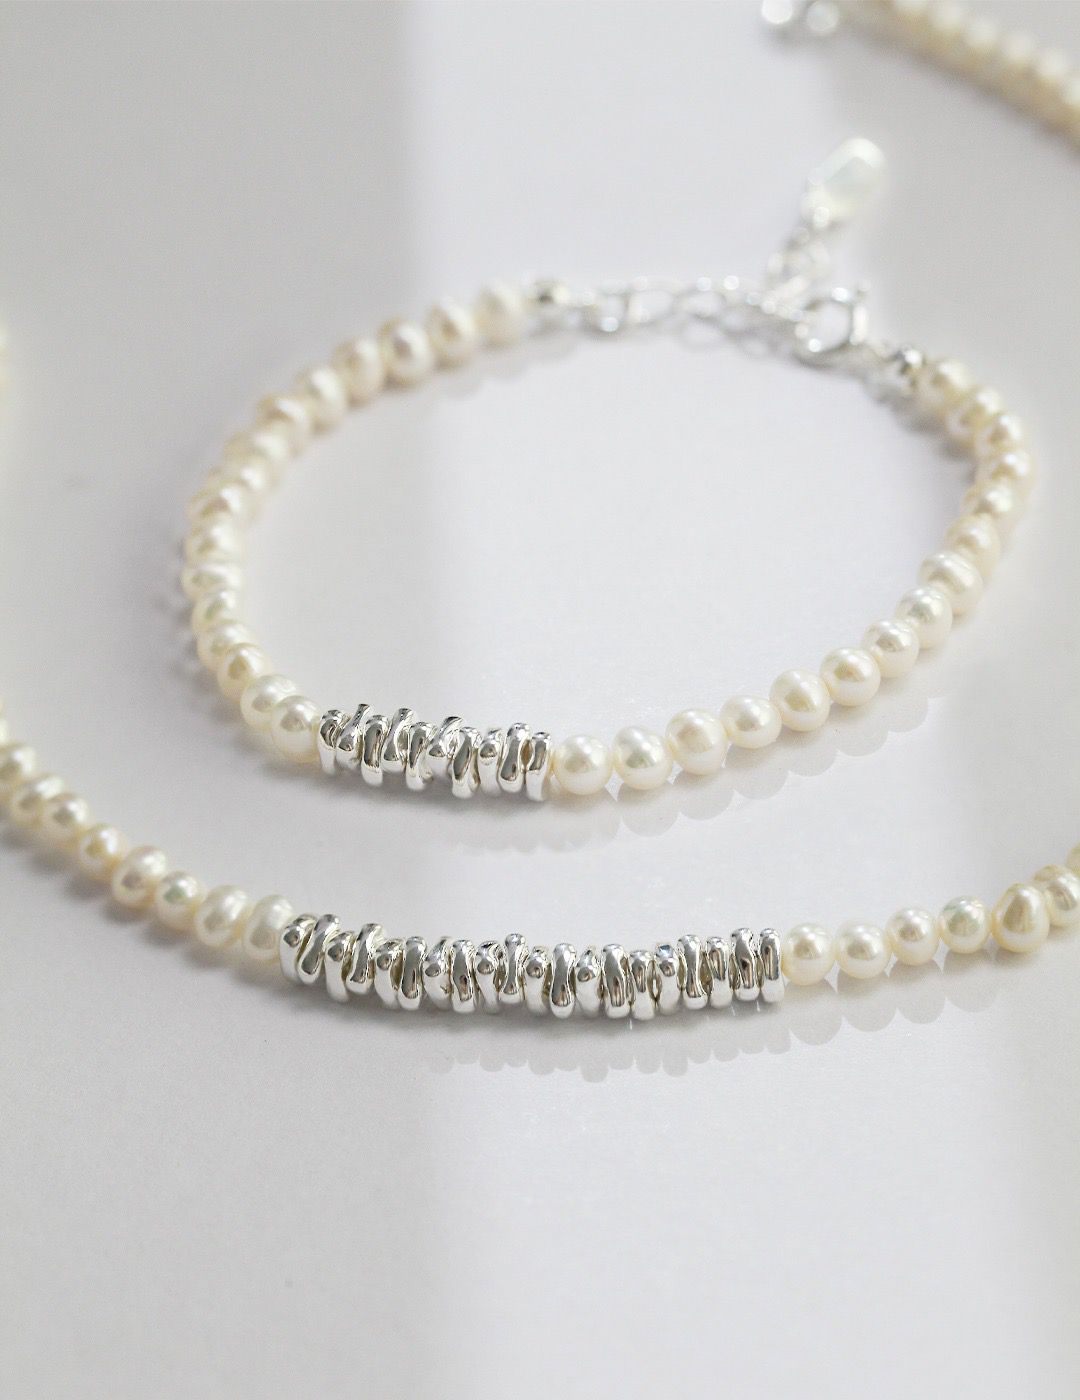 Freshwater Pearl Necklace with S925 Sterling Silver Chain - Classic Elegance and Modern Style